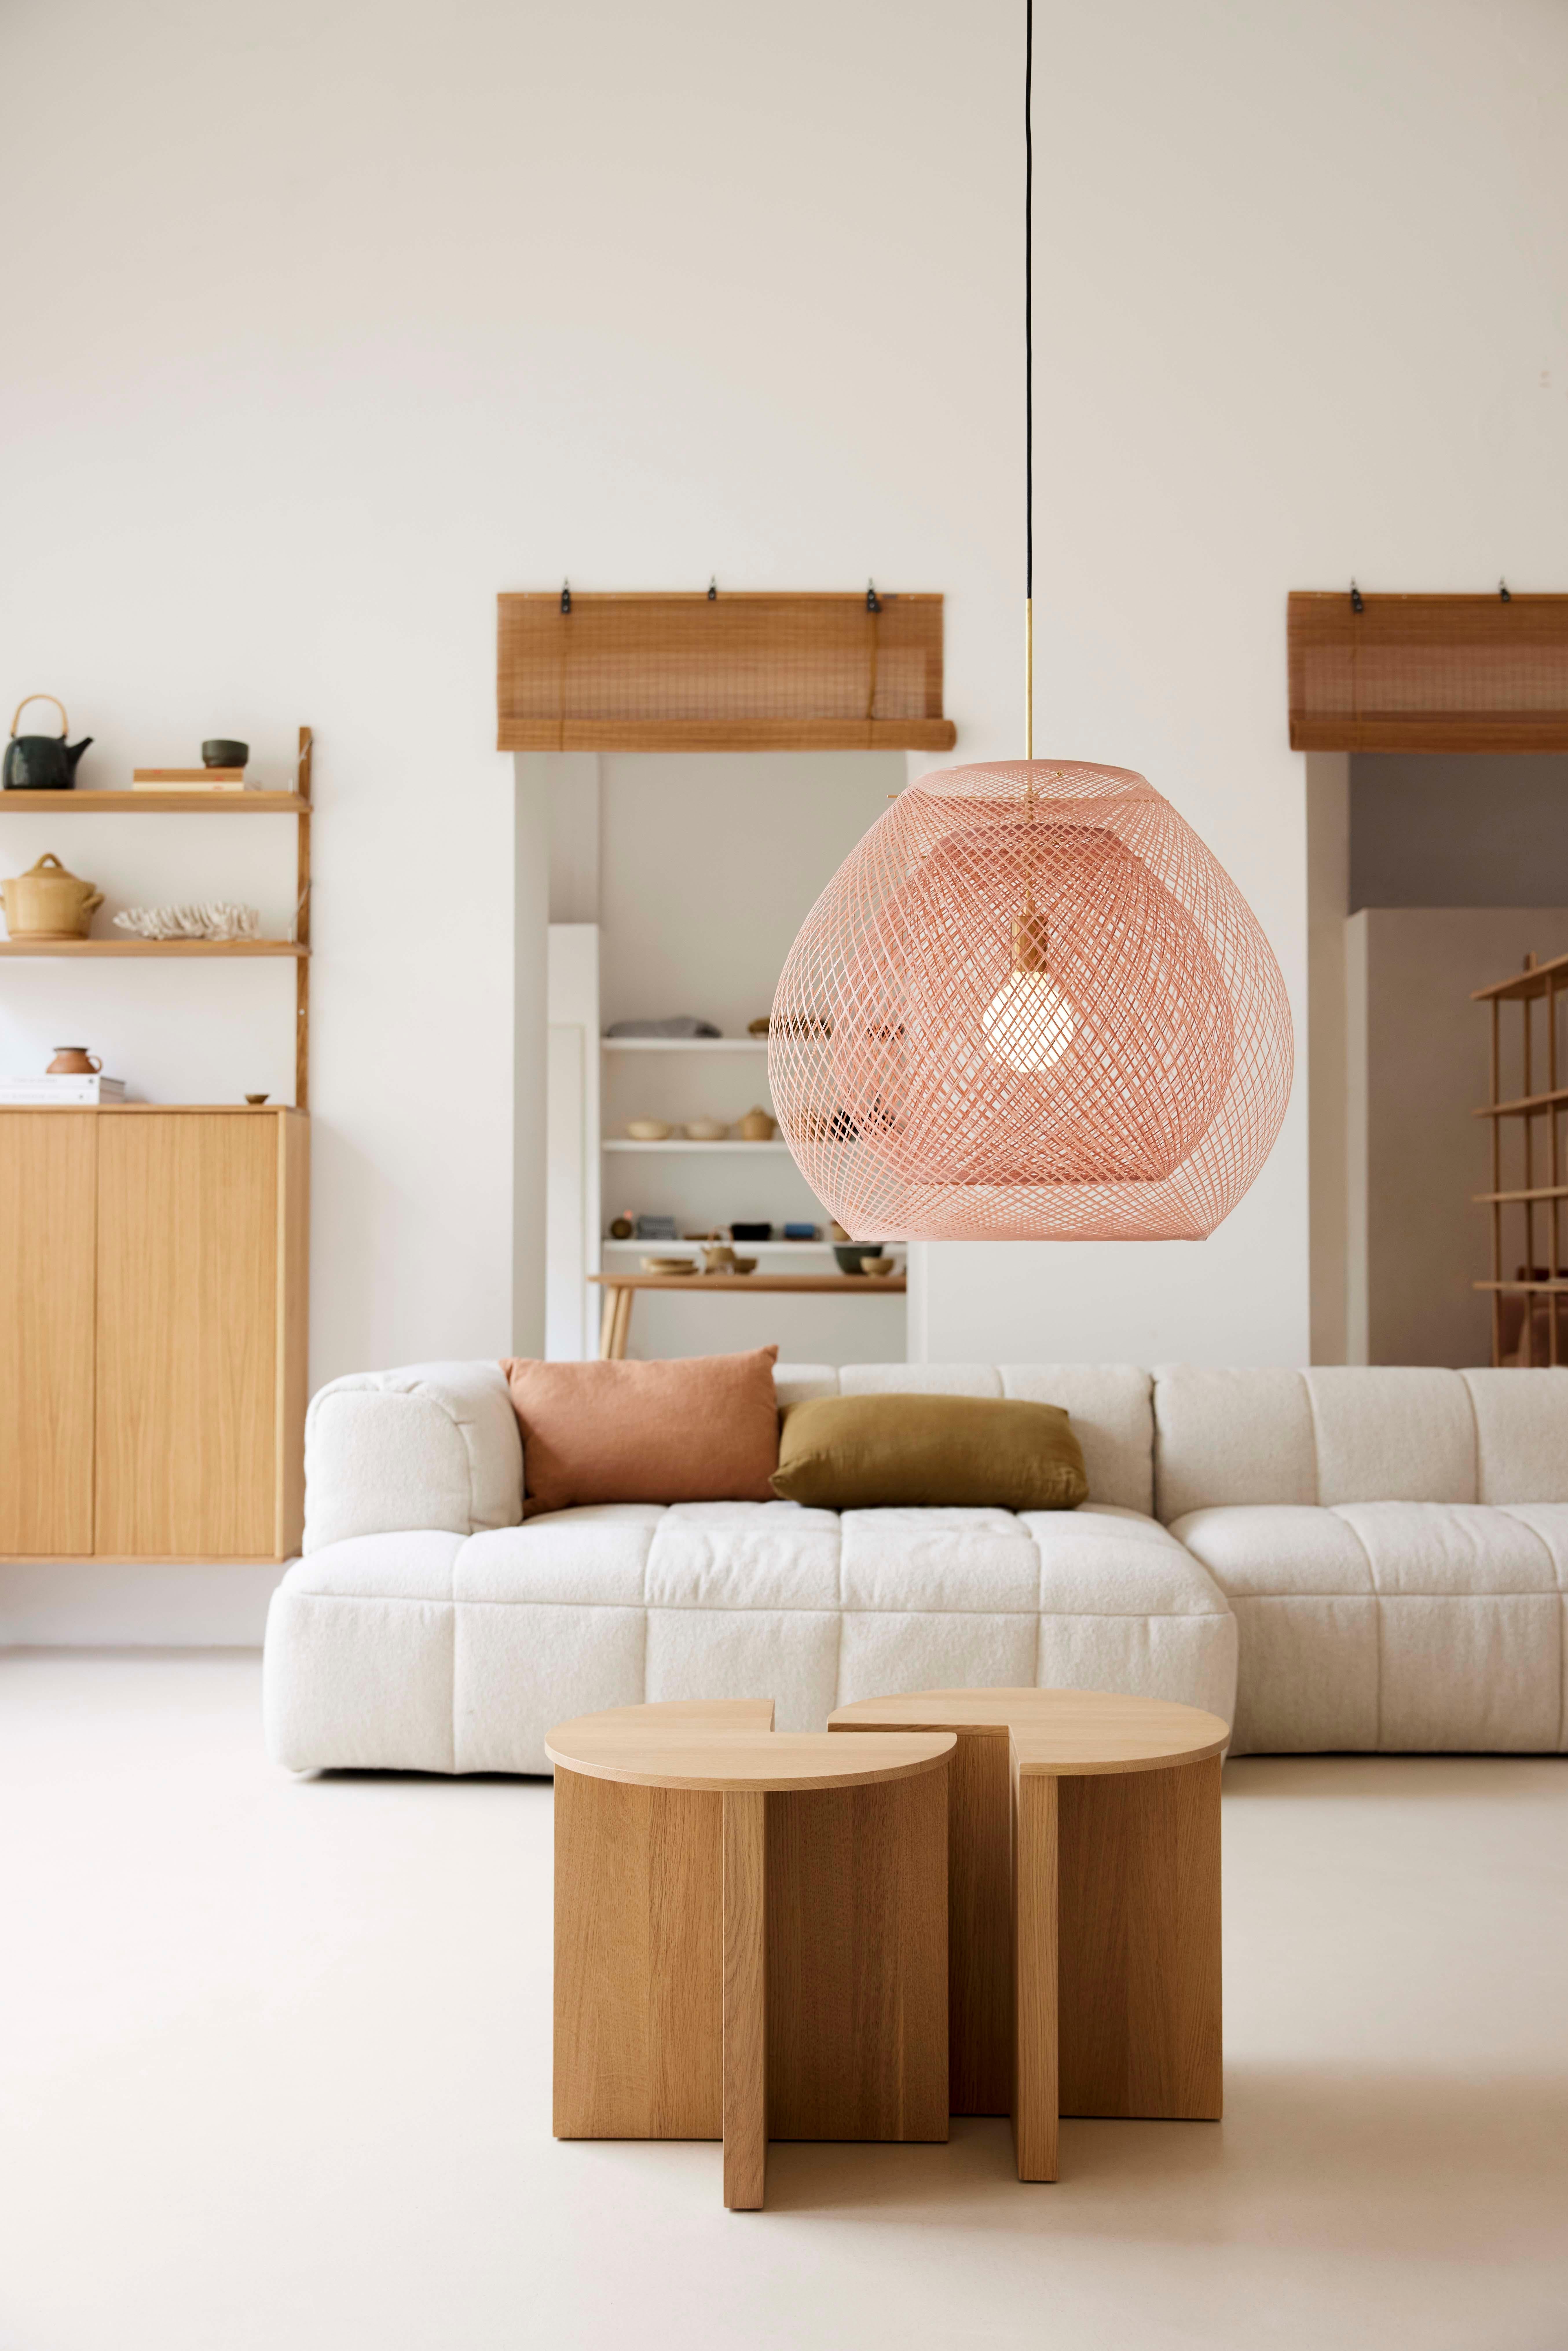 Large pink moon twilight set pendant lamp by Atelier Robotiq
Dimensions: D 72 x H 64 cm
Materials: Resin-impregnated industrial fiber.
Available in different colors: Golden Hour, Pink Moon, and Indigo Night.
Also available in single